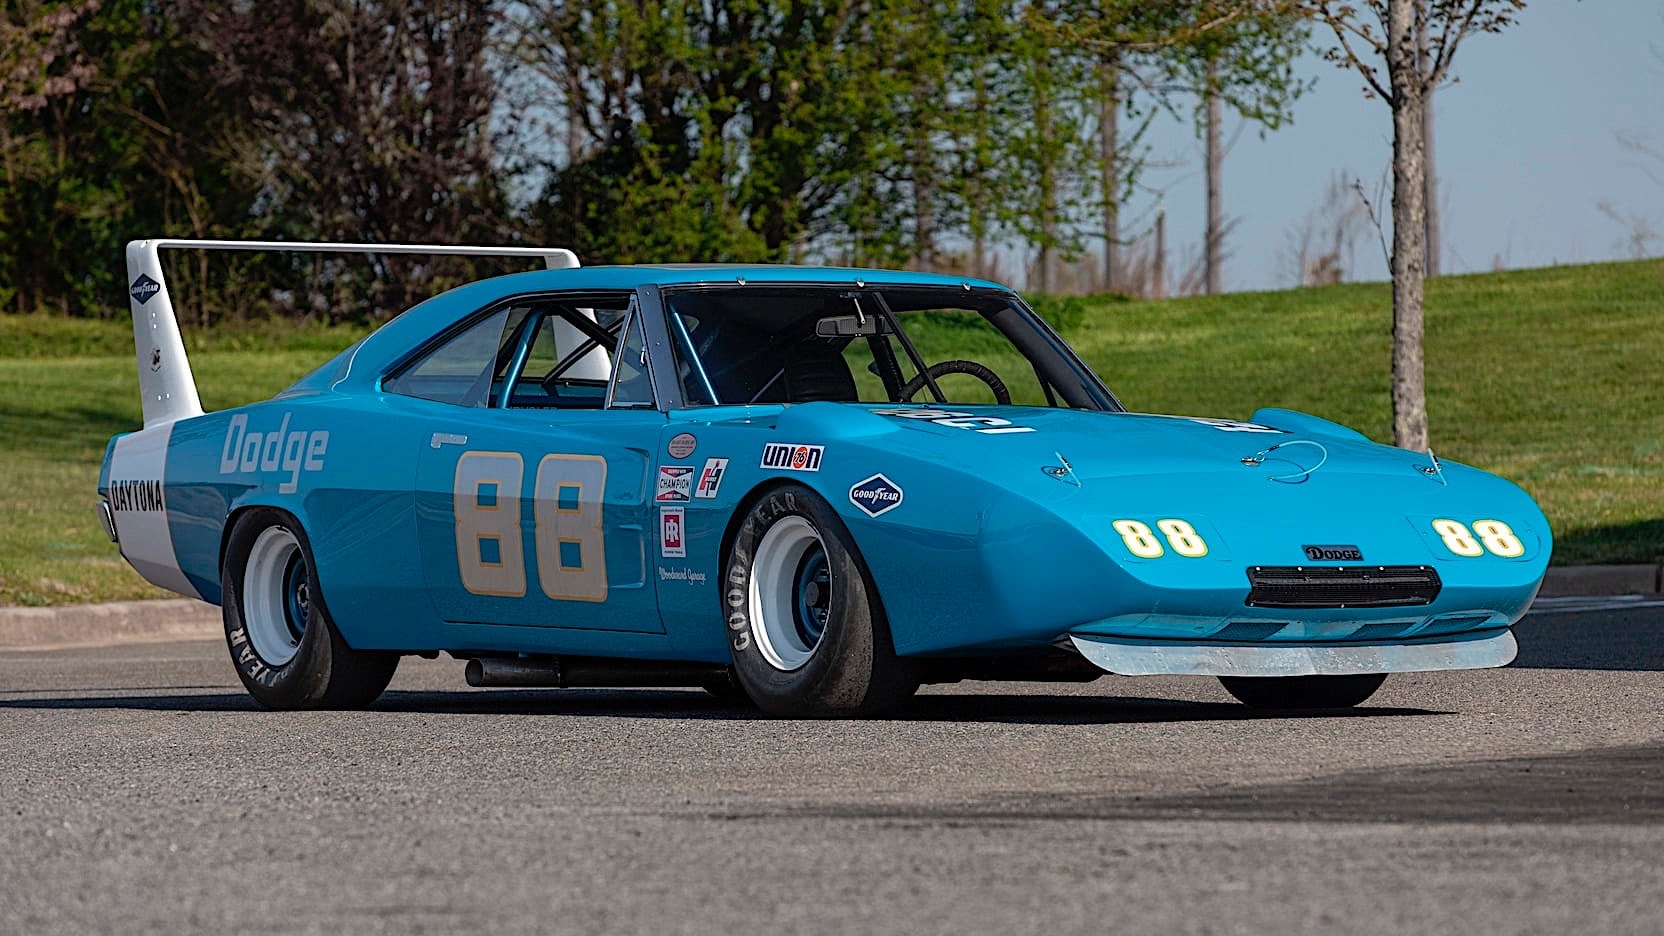 This 1969 Dodge Charger Daytona Was to Hit 200 MPH on a Closed -